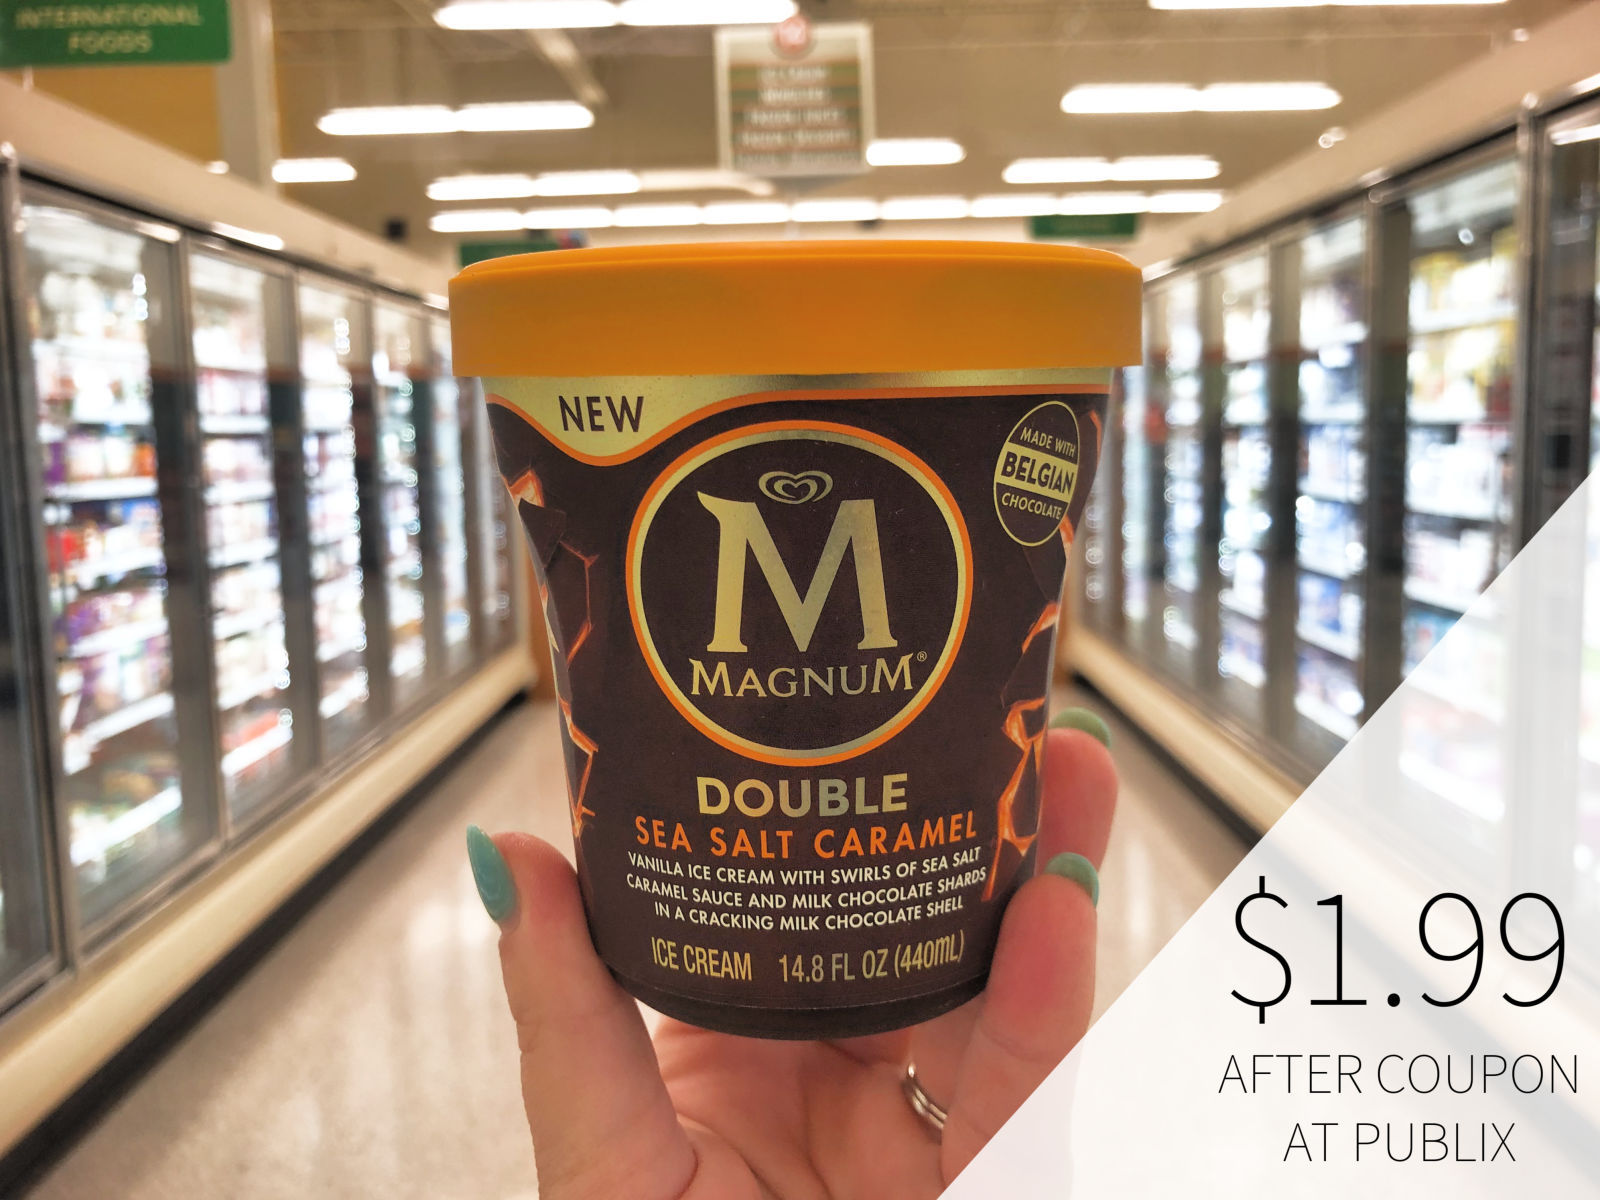 Still Time To Grab Your Favorite Magnum Ice Cream Varieties During The Publix BOGO Sale